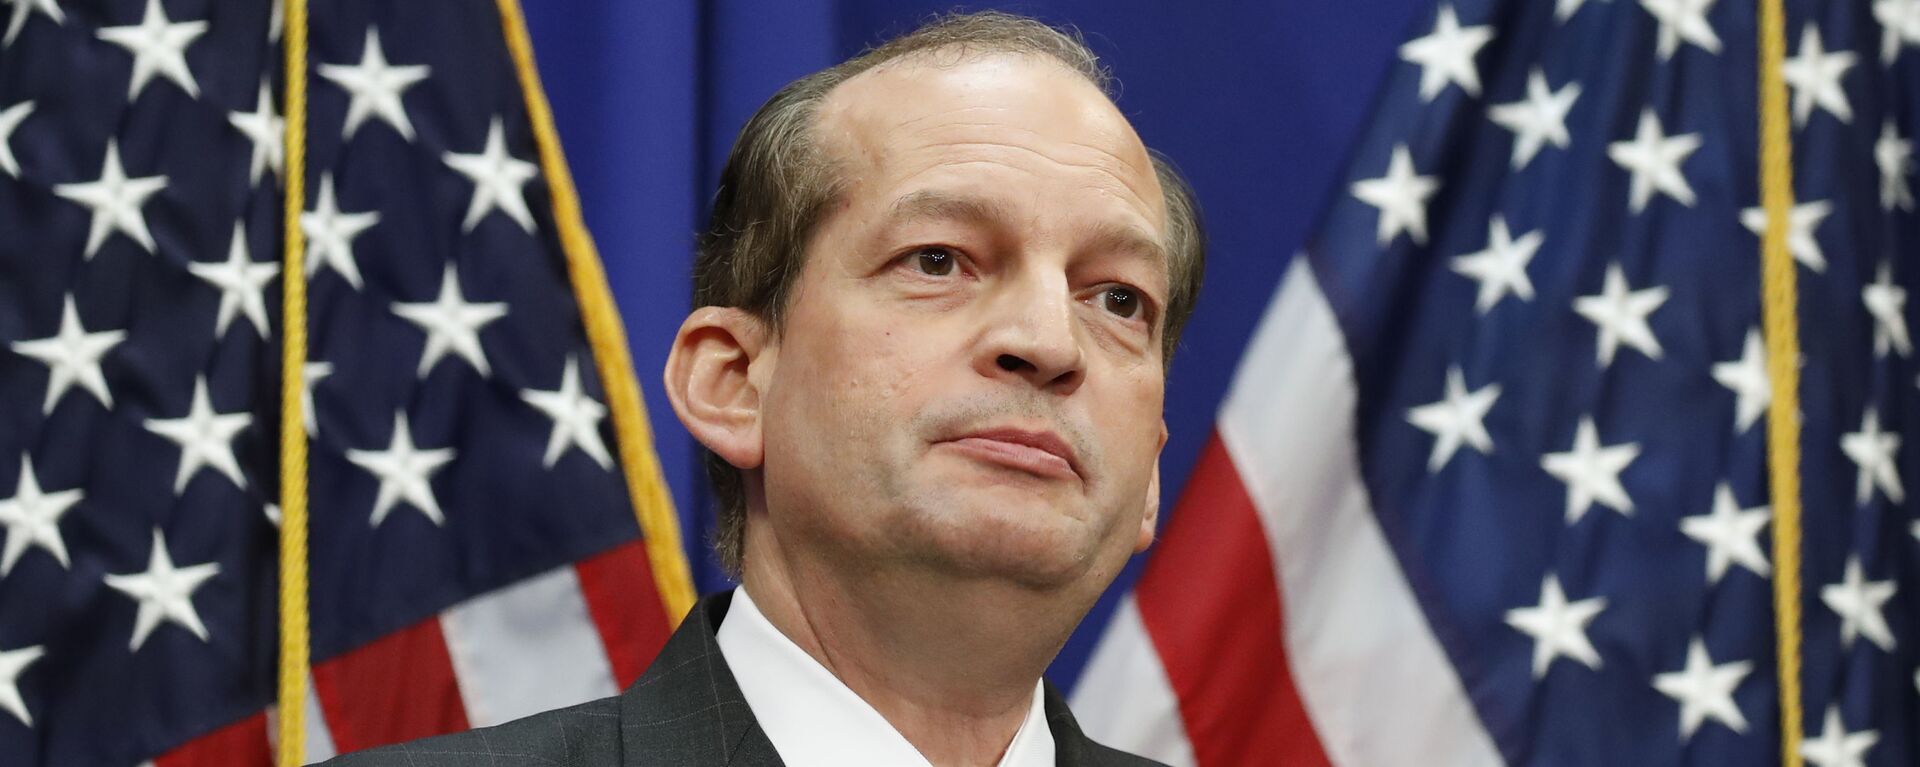 Labor Secretary Alex Acosta speaks during a media availability at the Department of Labor, Wednesday, July 10, 2019, in Washington. - Sputnik International, 1920, 13.07.2019